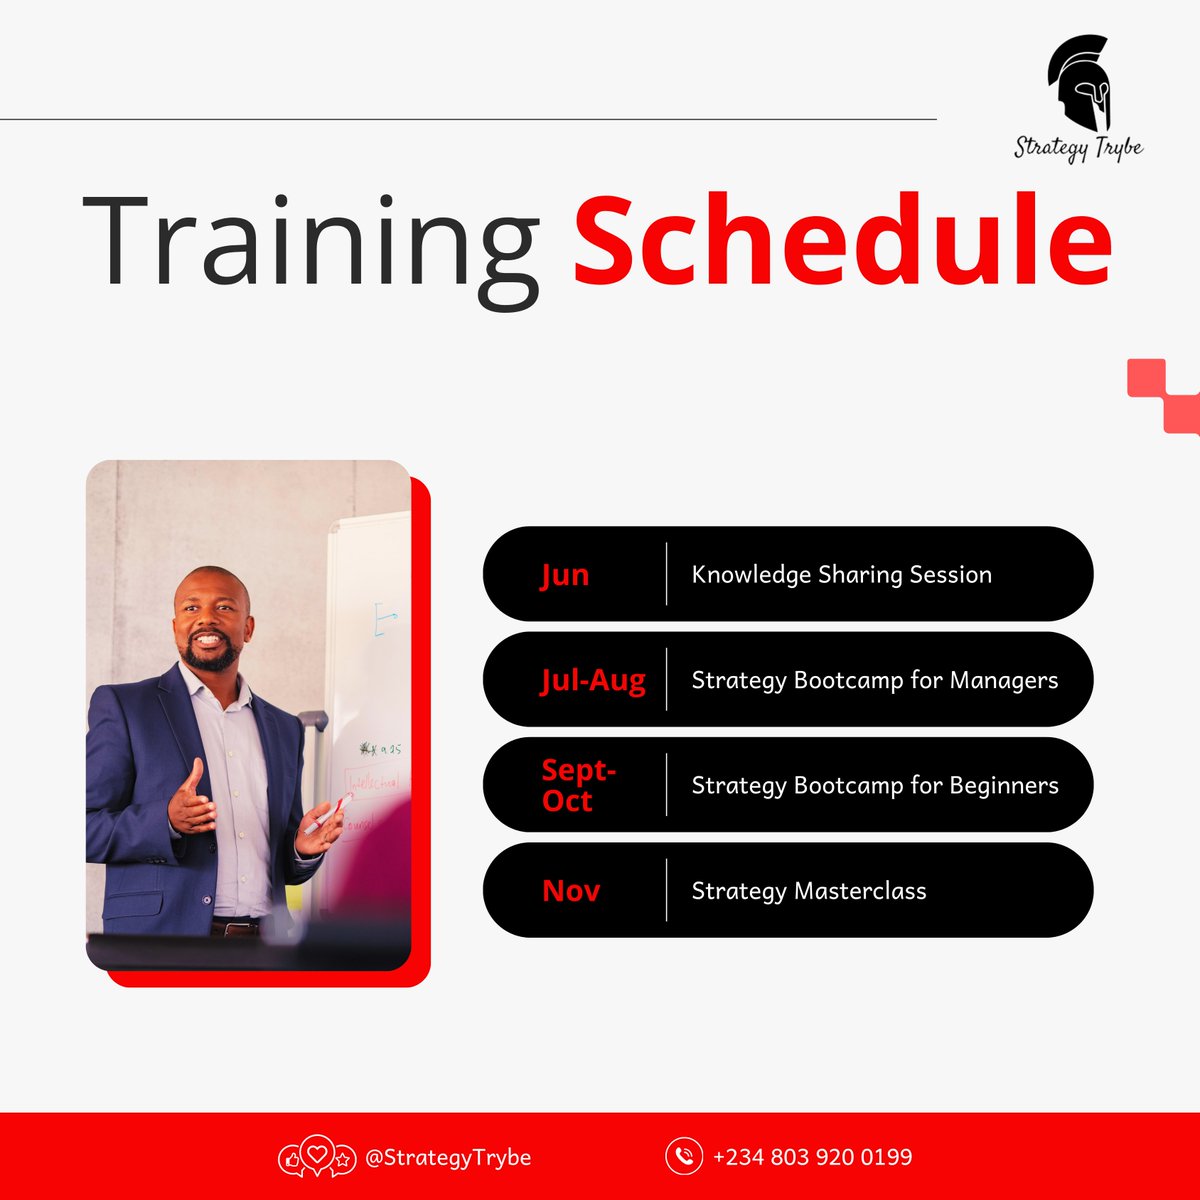 Mark your calendars 📅 for these elite Strategy and Account Planning training sessions that will give you the competitive edge you need to thrive in your professional and personal lives.

#strategytrybe #strategy #creativity #accountplanning #creativity #marketingcommunications